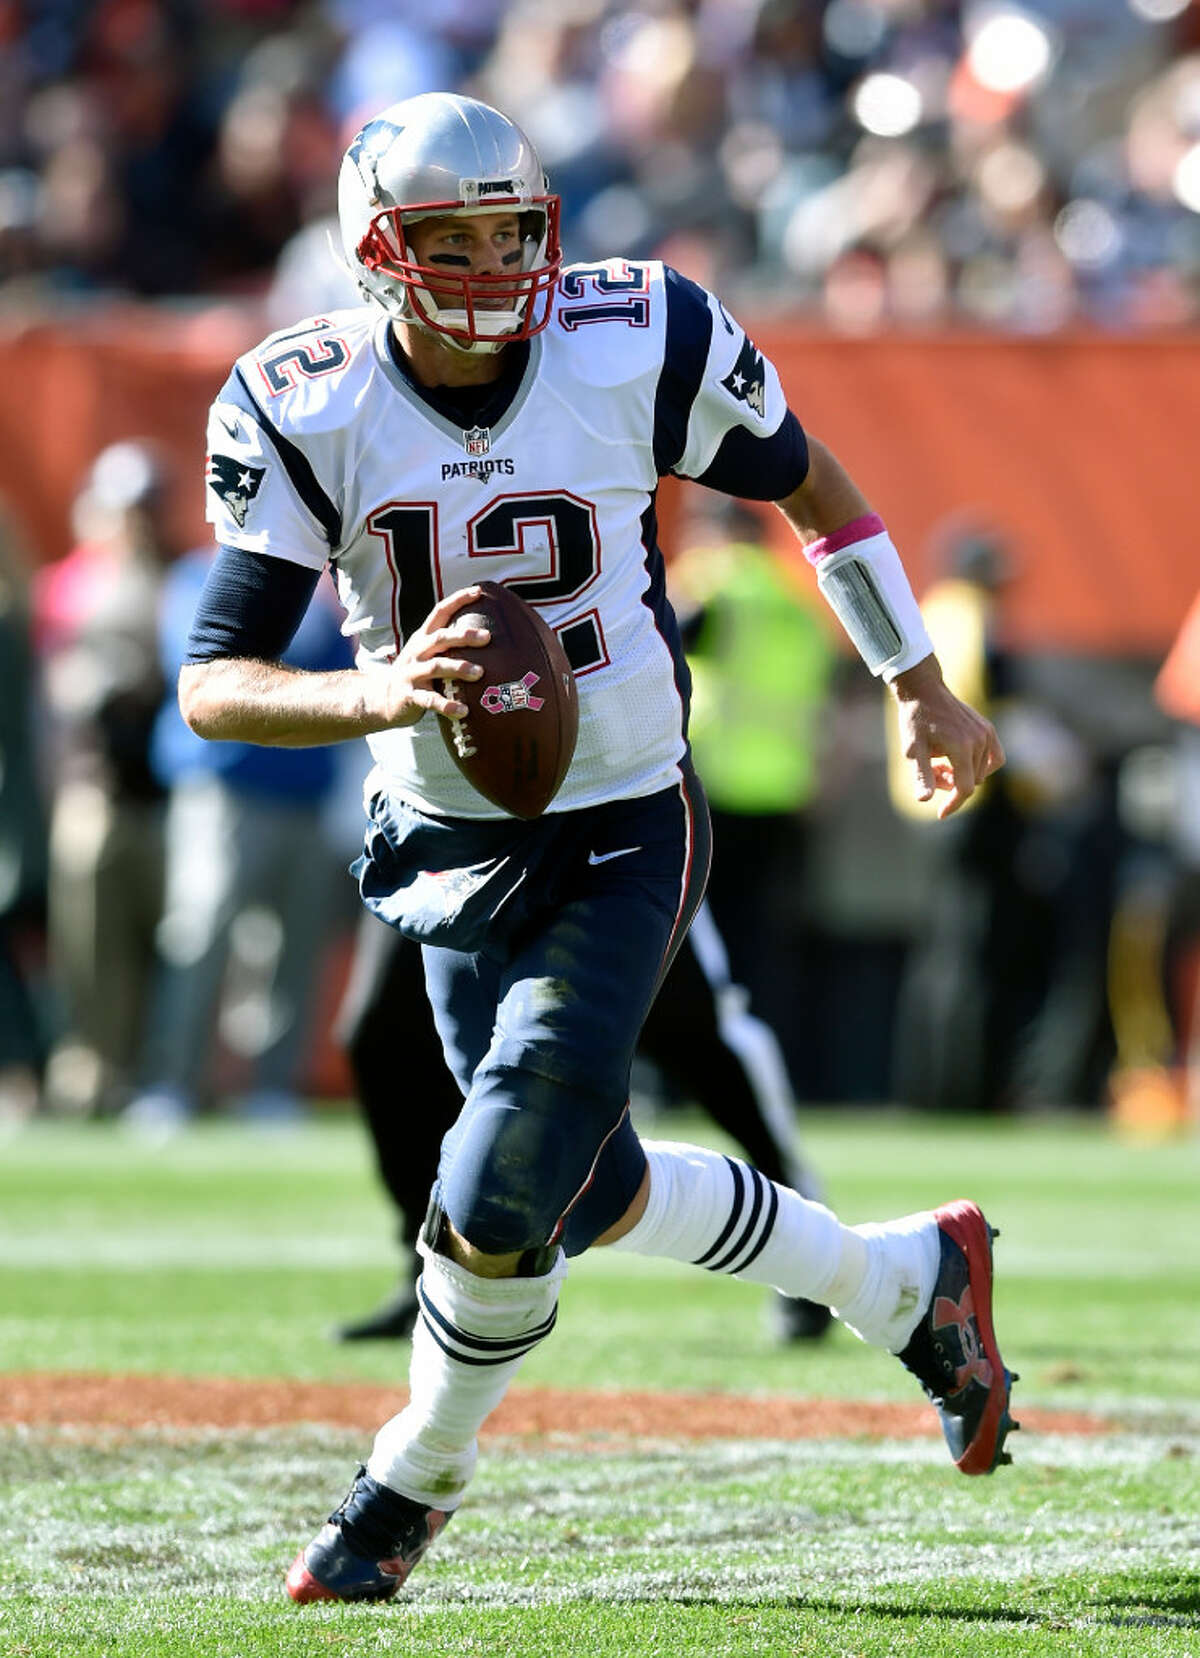 FILE - In this Oct. 9, 2016, file photo, New England Patriots quarterback Tom Brady (12) runs with the ball during an NFL football game against the Cleveland Browns, in Cleveland. The Falcons (13-5) take on the New England Patriots (16-2) in Super Bowl LI in Houston on Feb. 5, 2017. (AP Photo/David Richard)